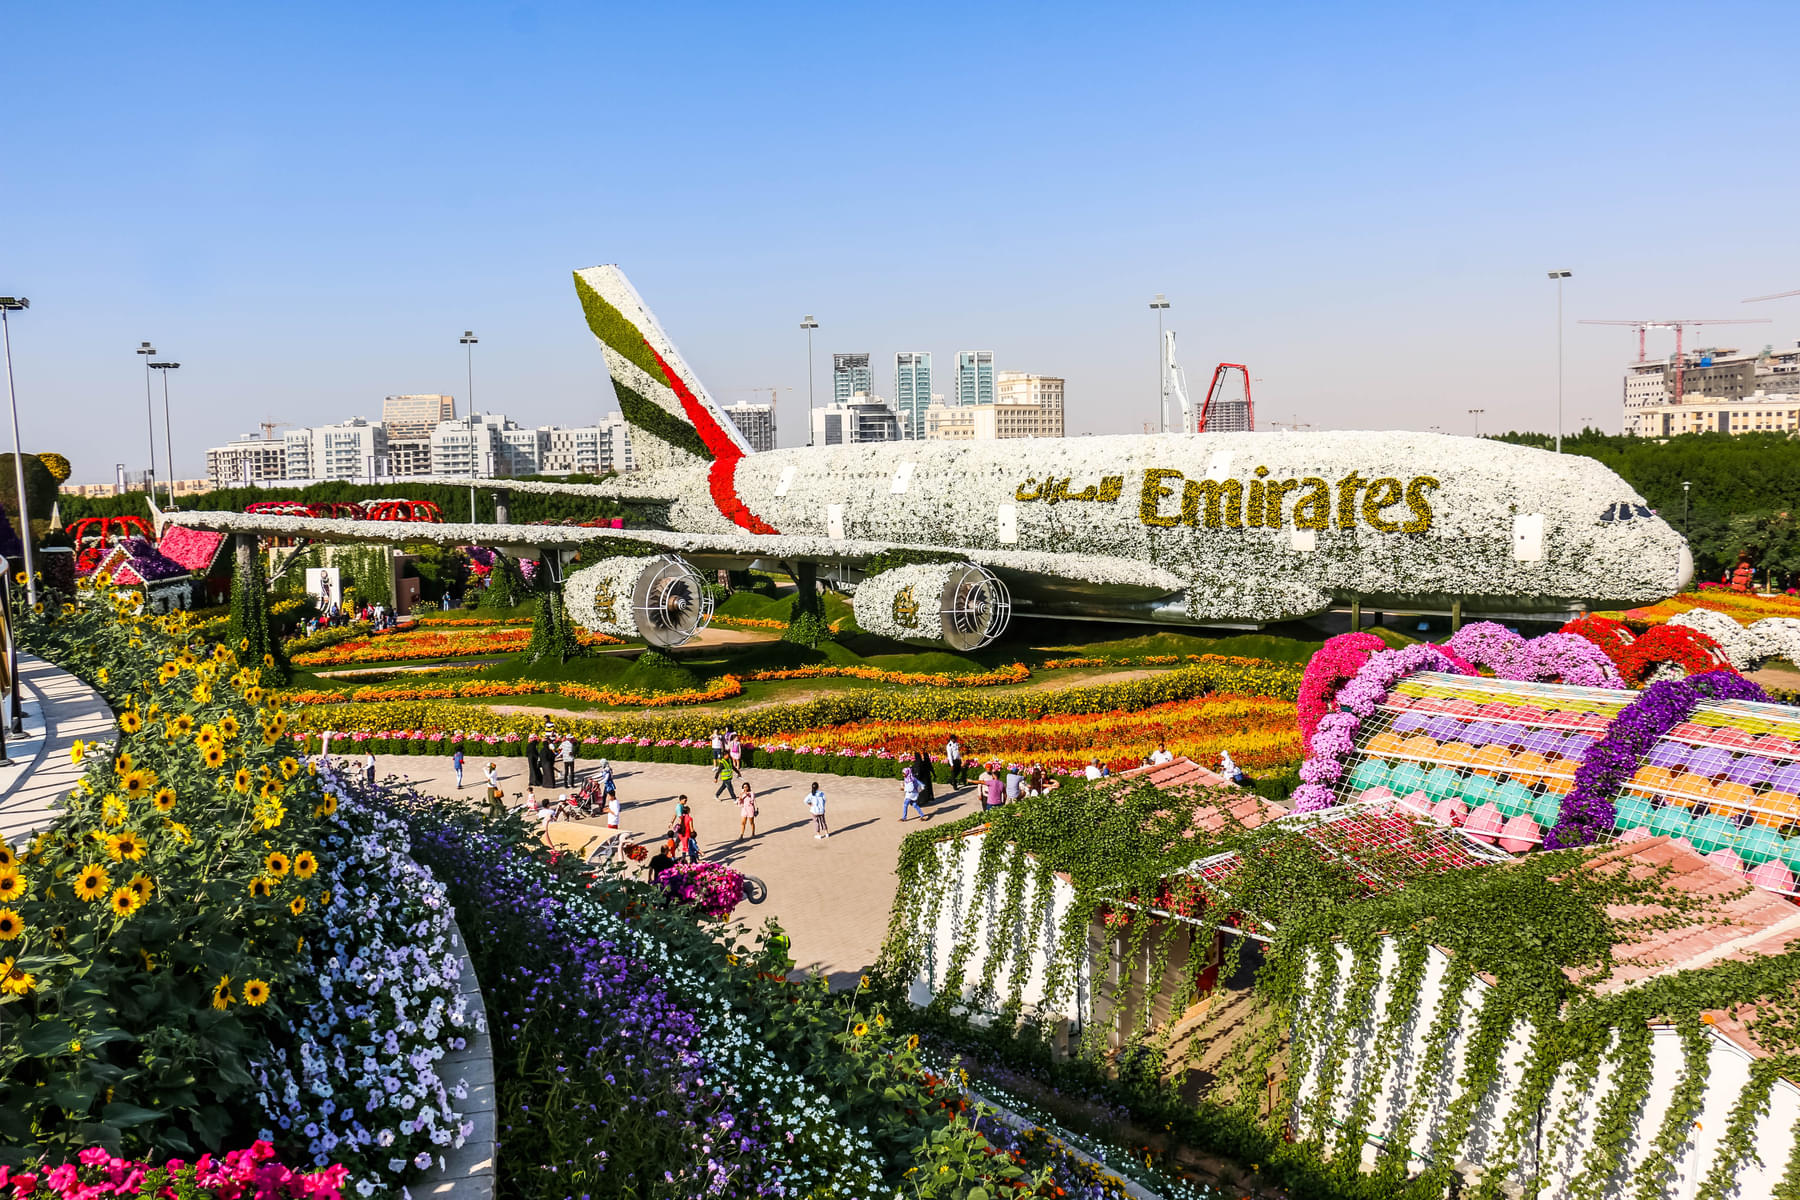 Witness the world’s largest floral installation -  Emirates A380 plane